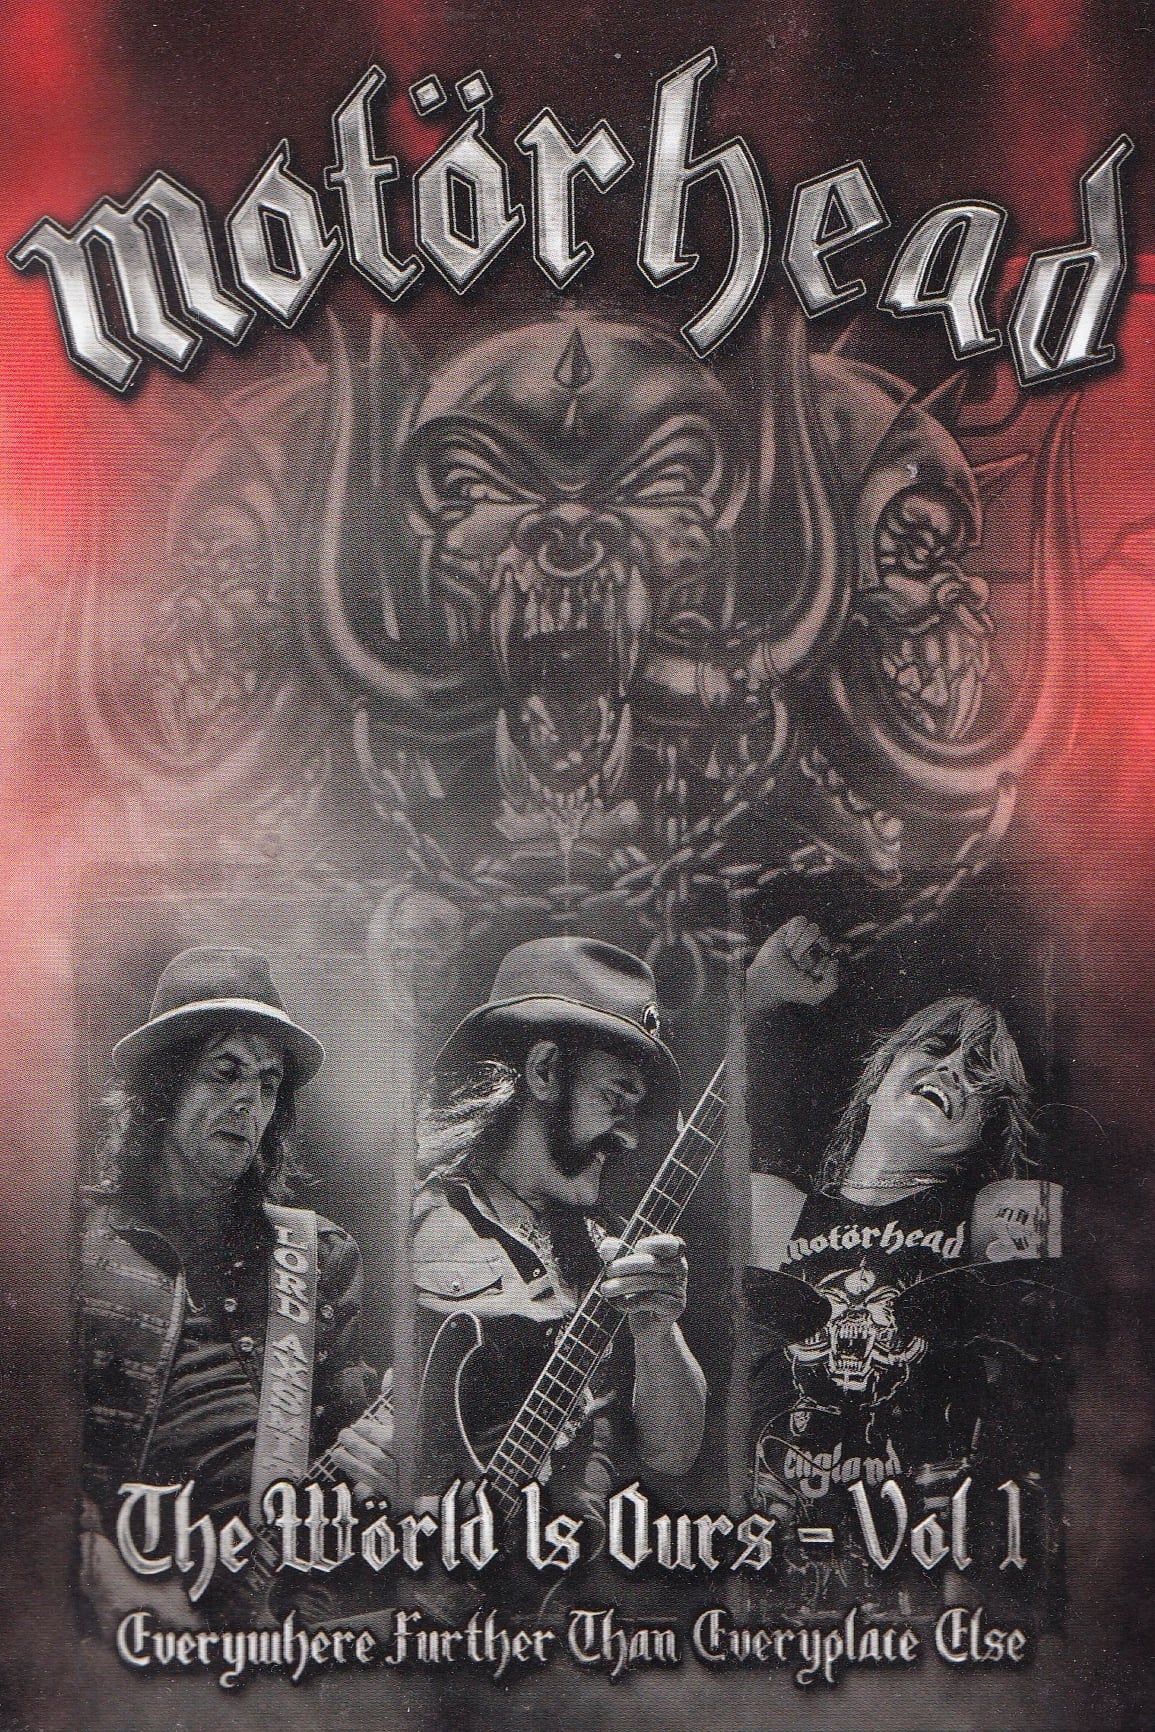 Motörhead : The Wörld Is Ours Vol 1 Everywhere Further Than Everyplace Else